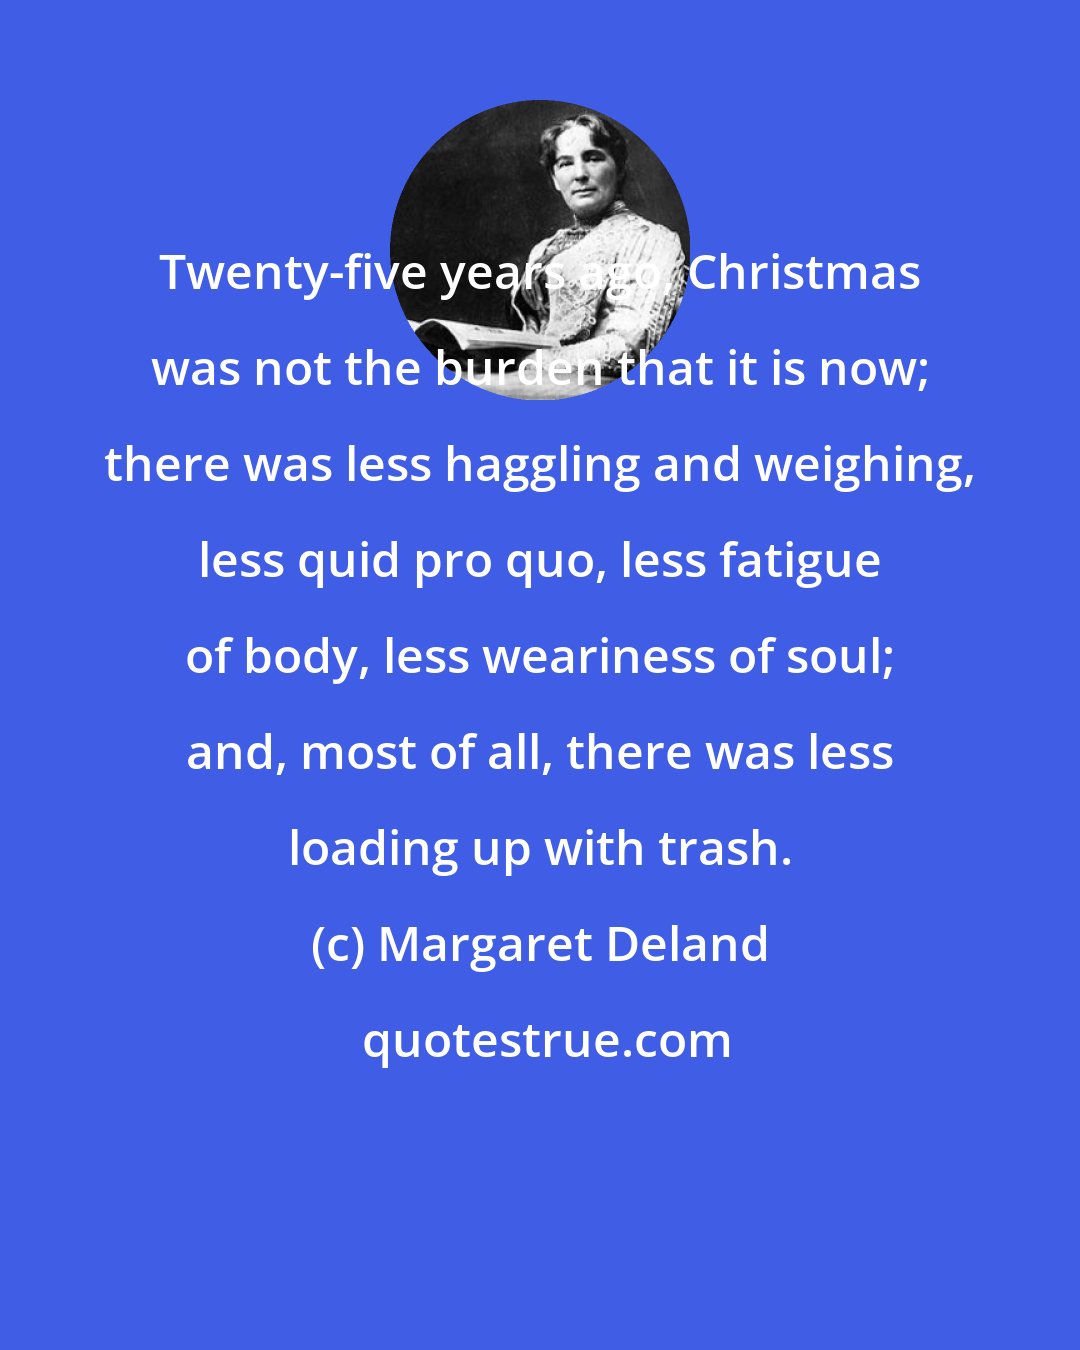 Margaret Deland: Twenty-five years ago, Christmas was not the burden that it is now; there was less haggling and weighing, less quid pro quo, less fatigue of body, less weariness of soul; and, most of all, there was less loading up with trash.